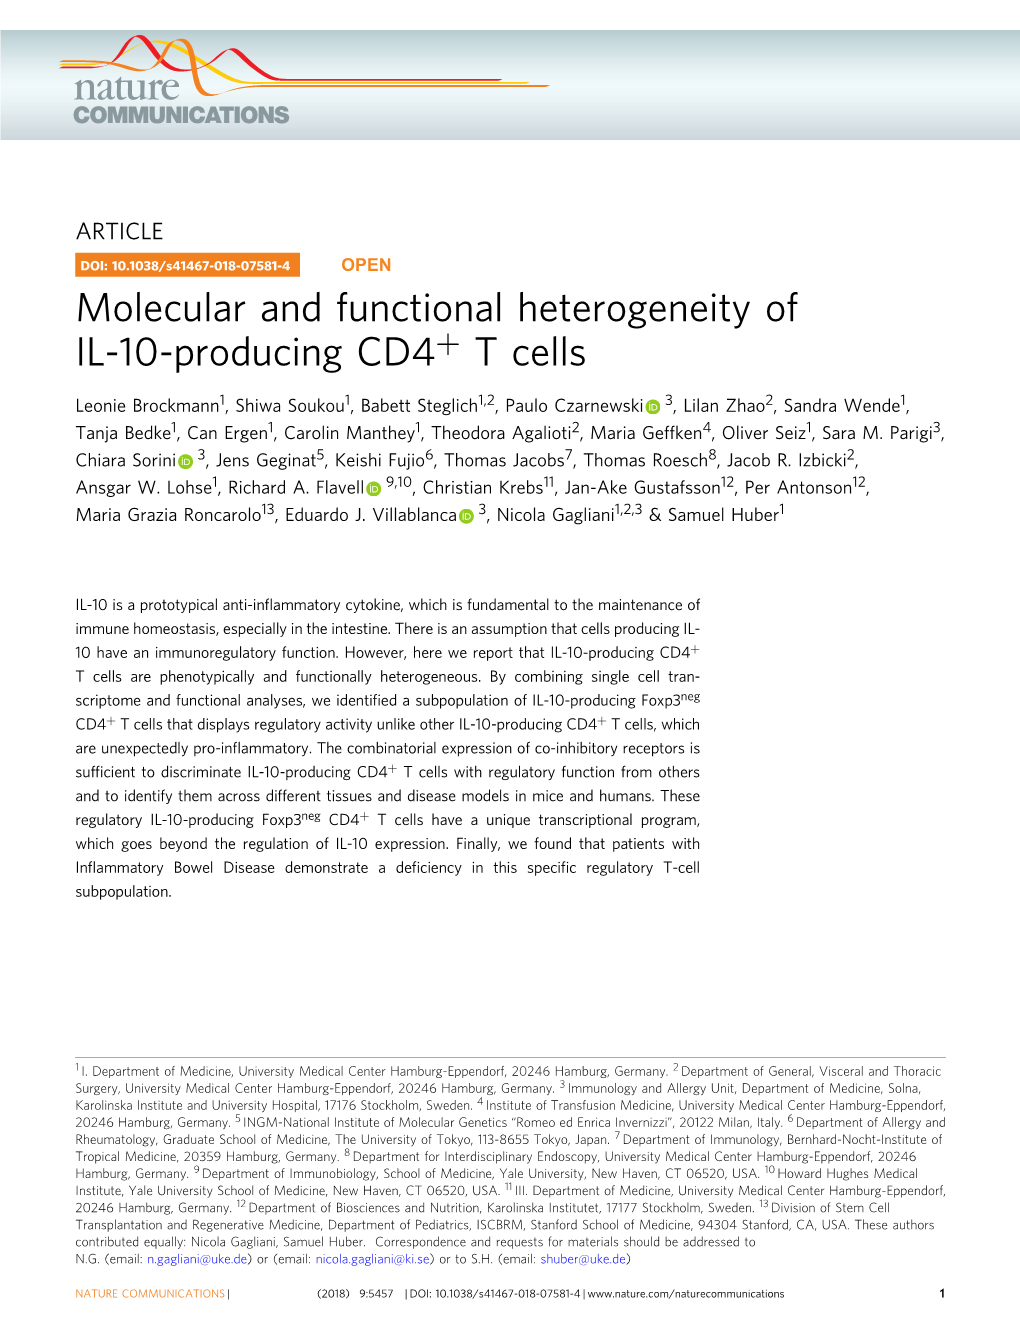 Molecular and Functional Heterogeneity of IL-10-Producing CD4+ T Cells